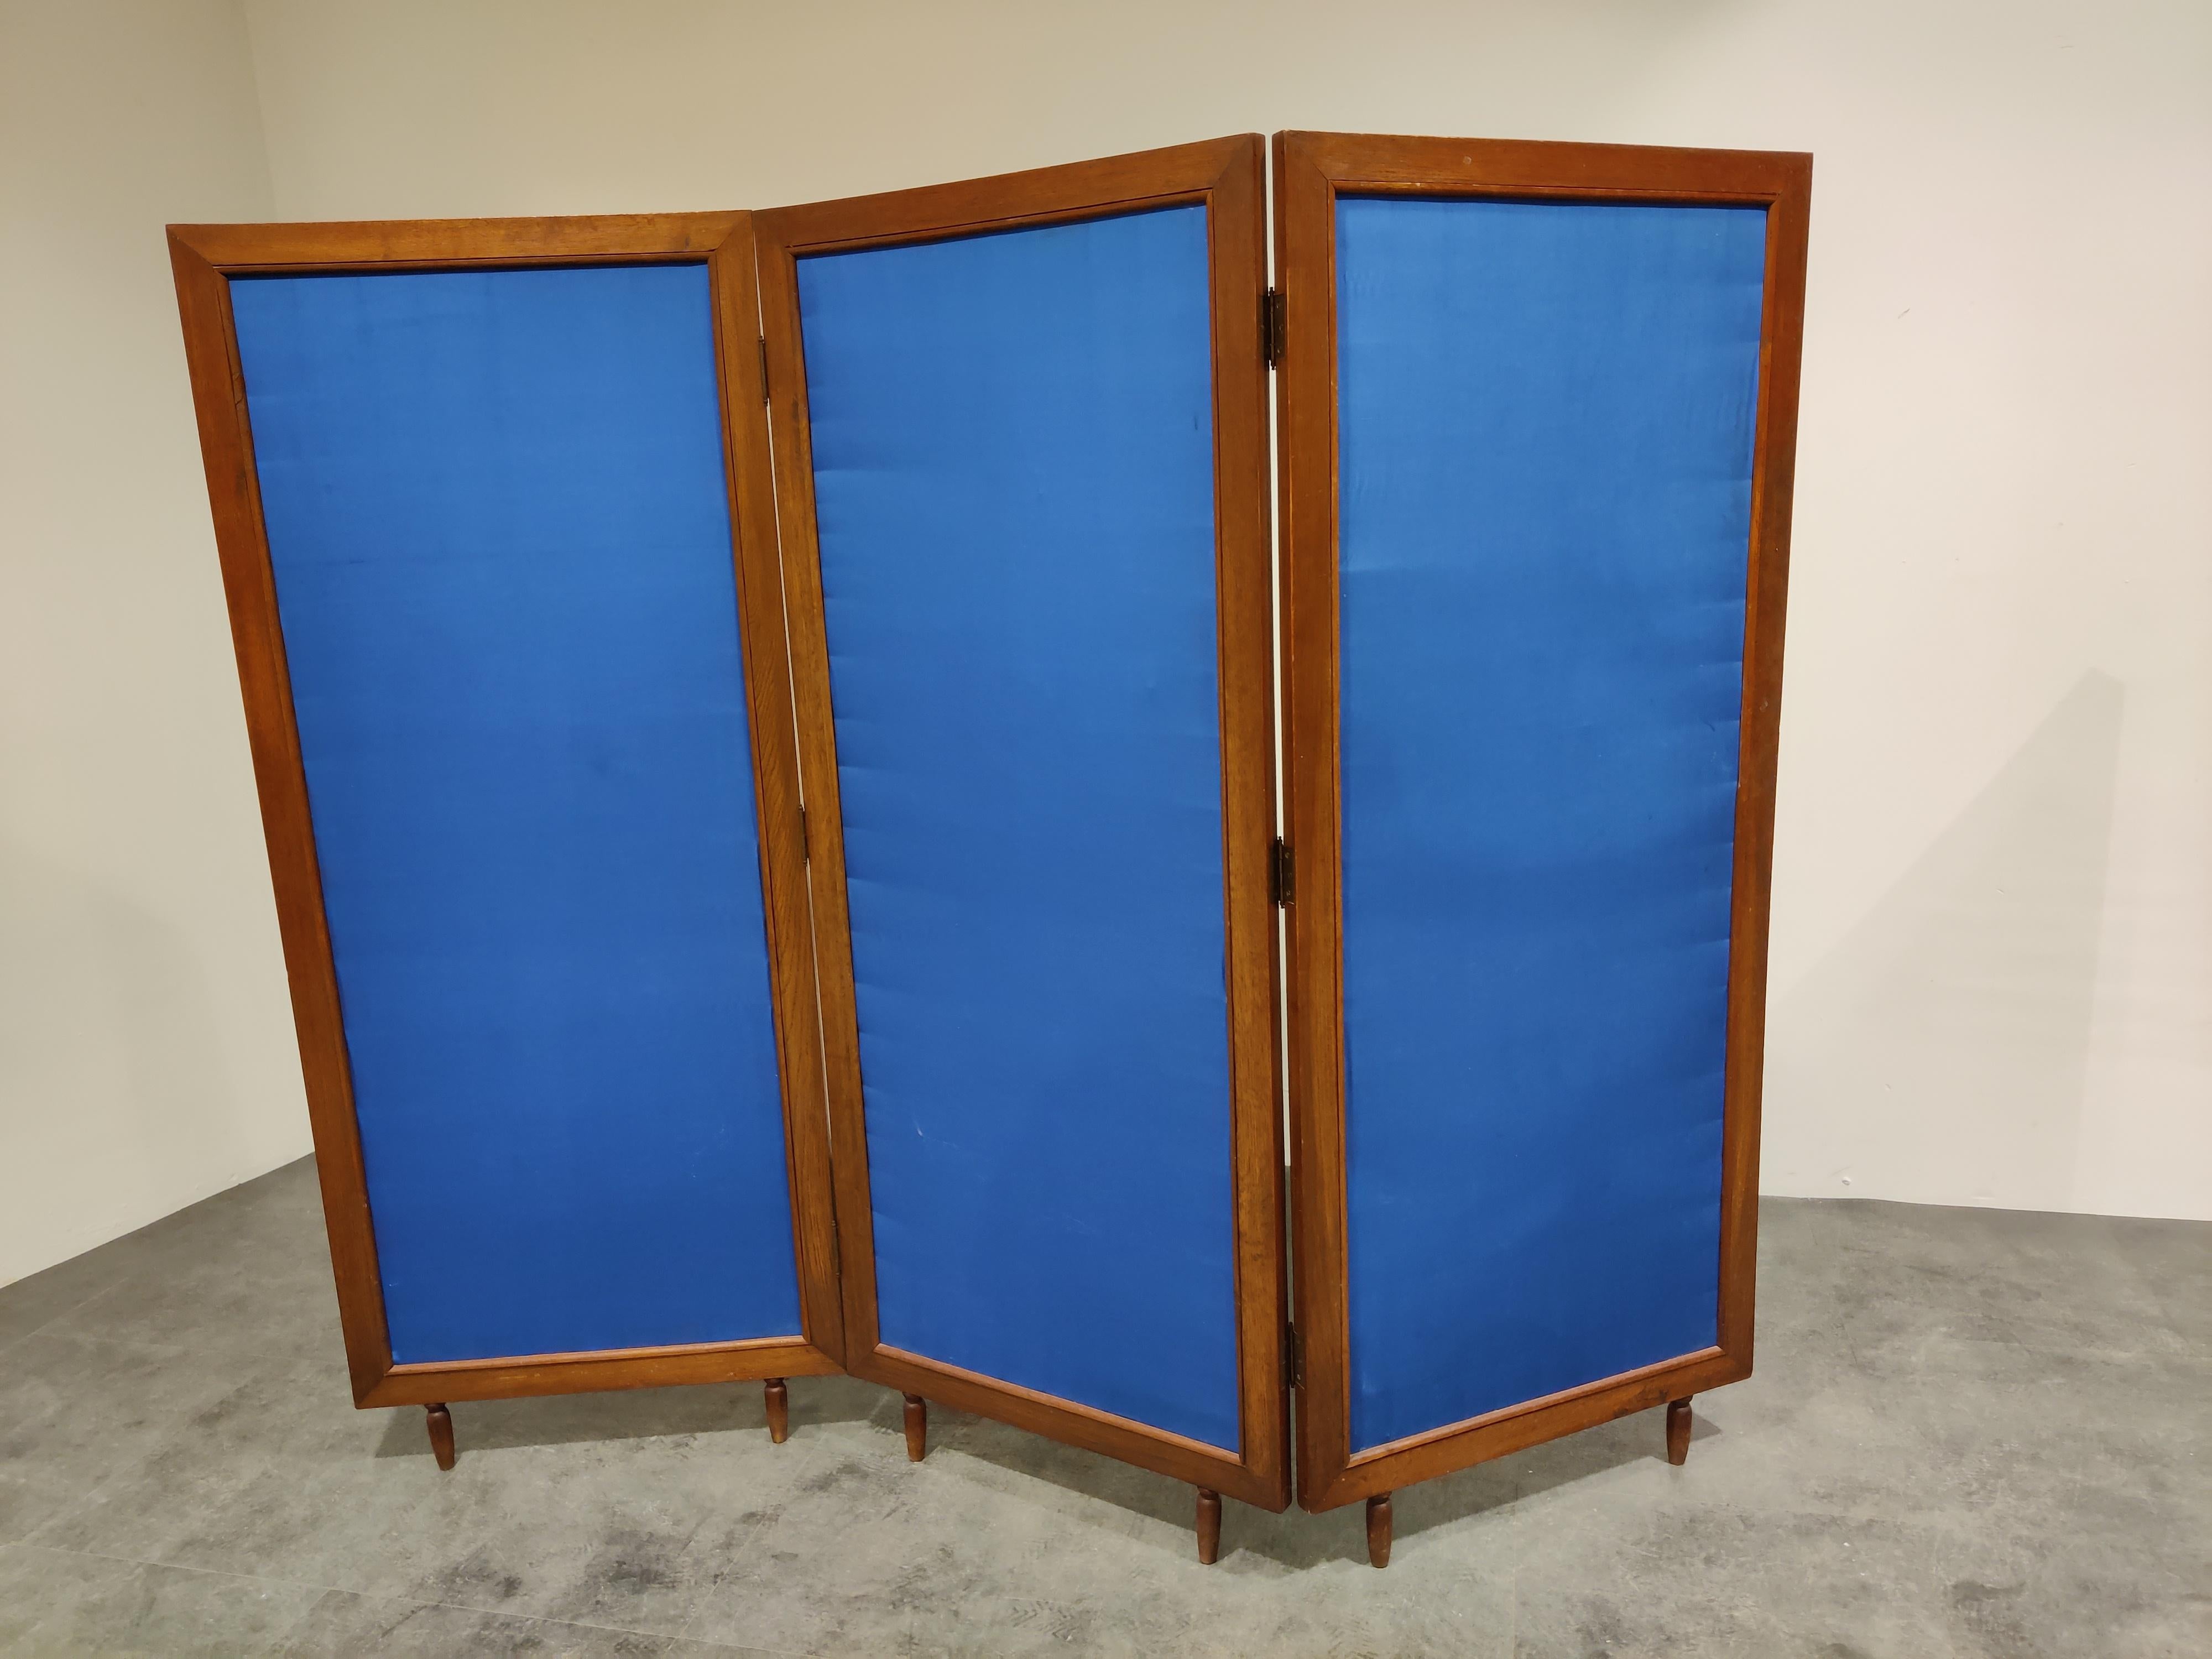 French Vintage Room Divider or Folding Screen, 1950s